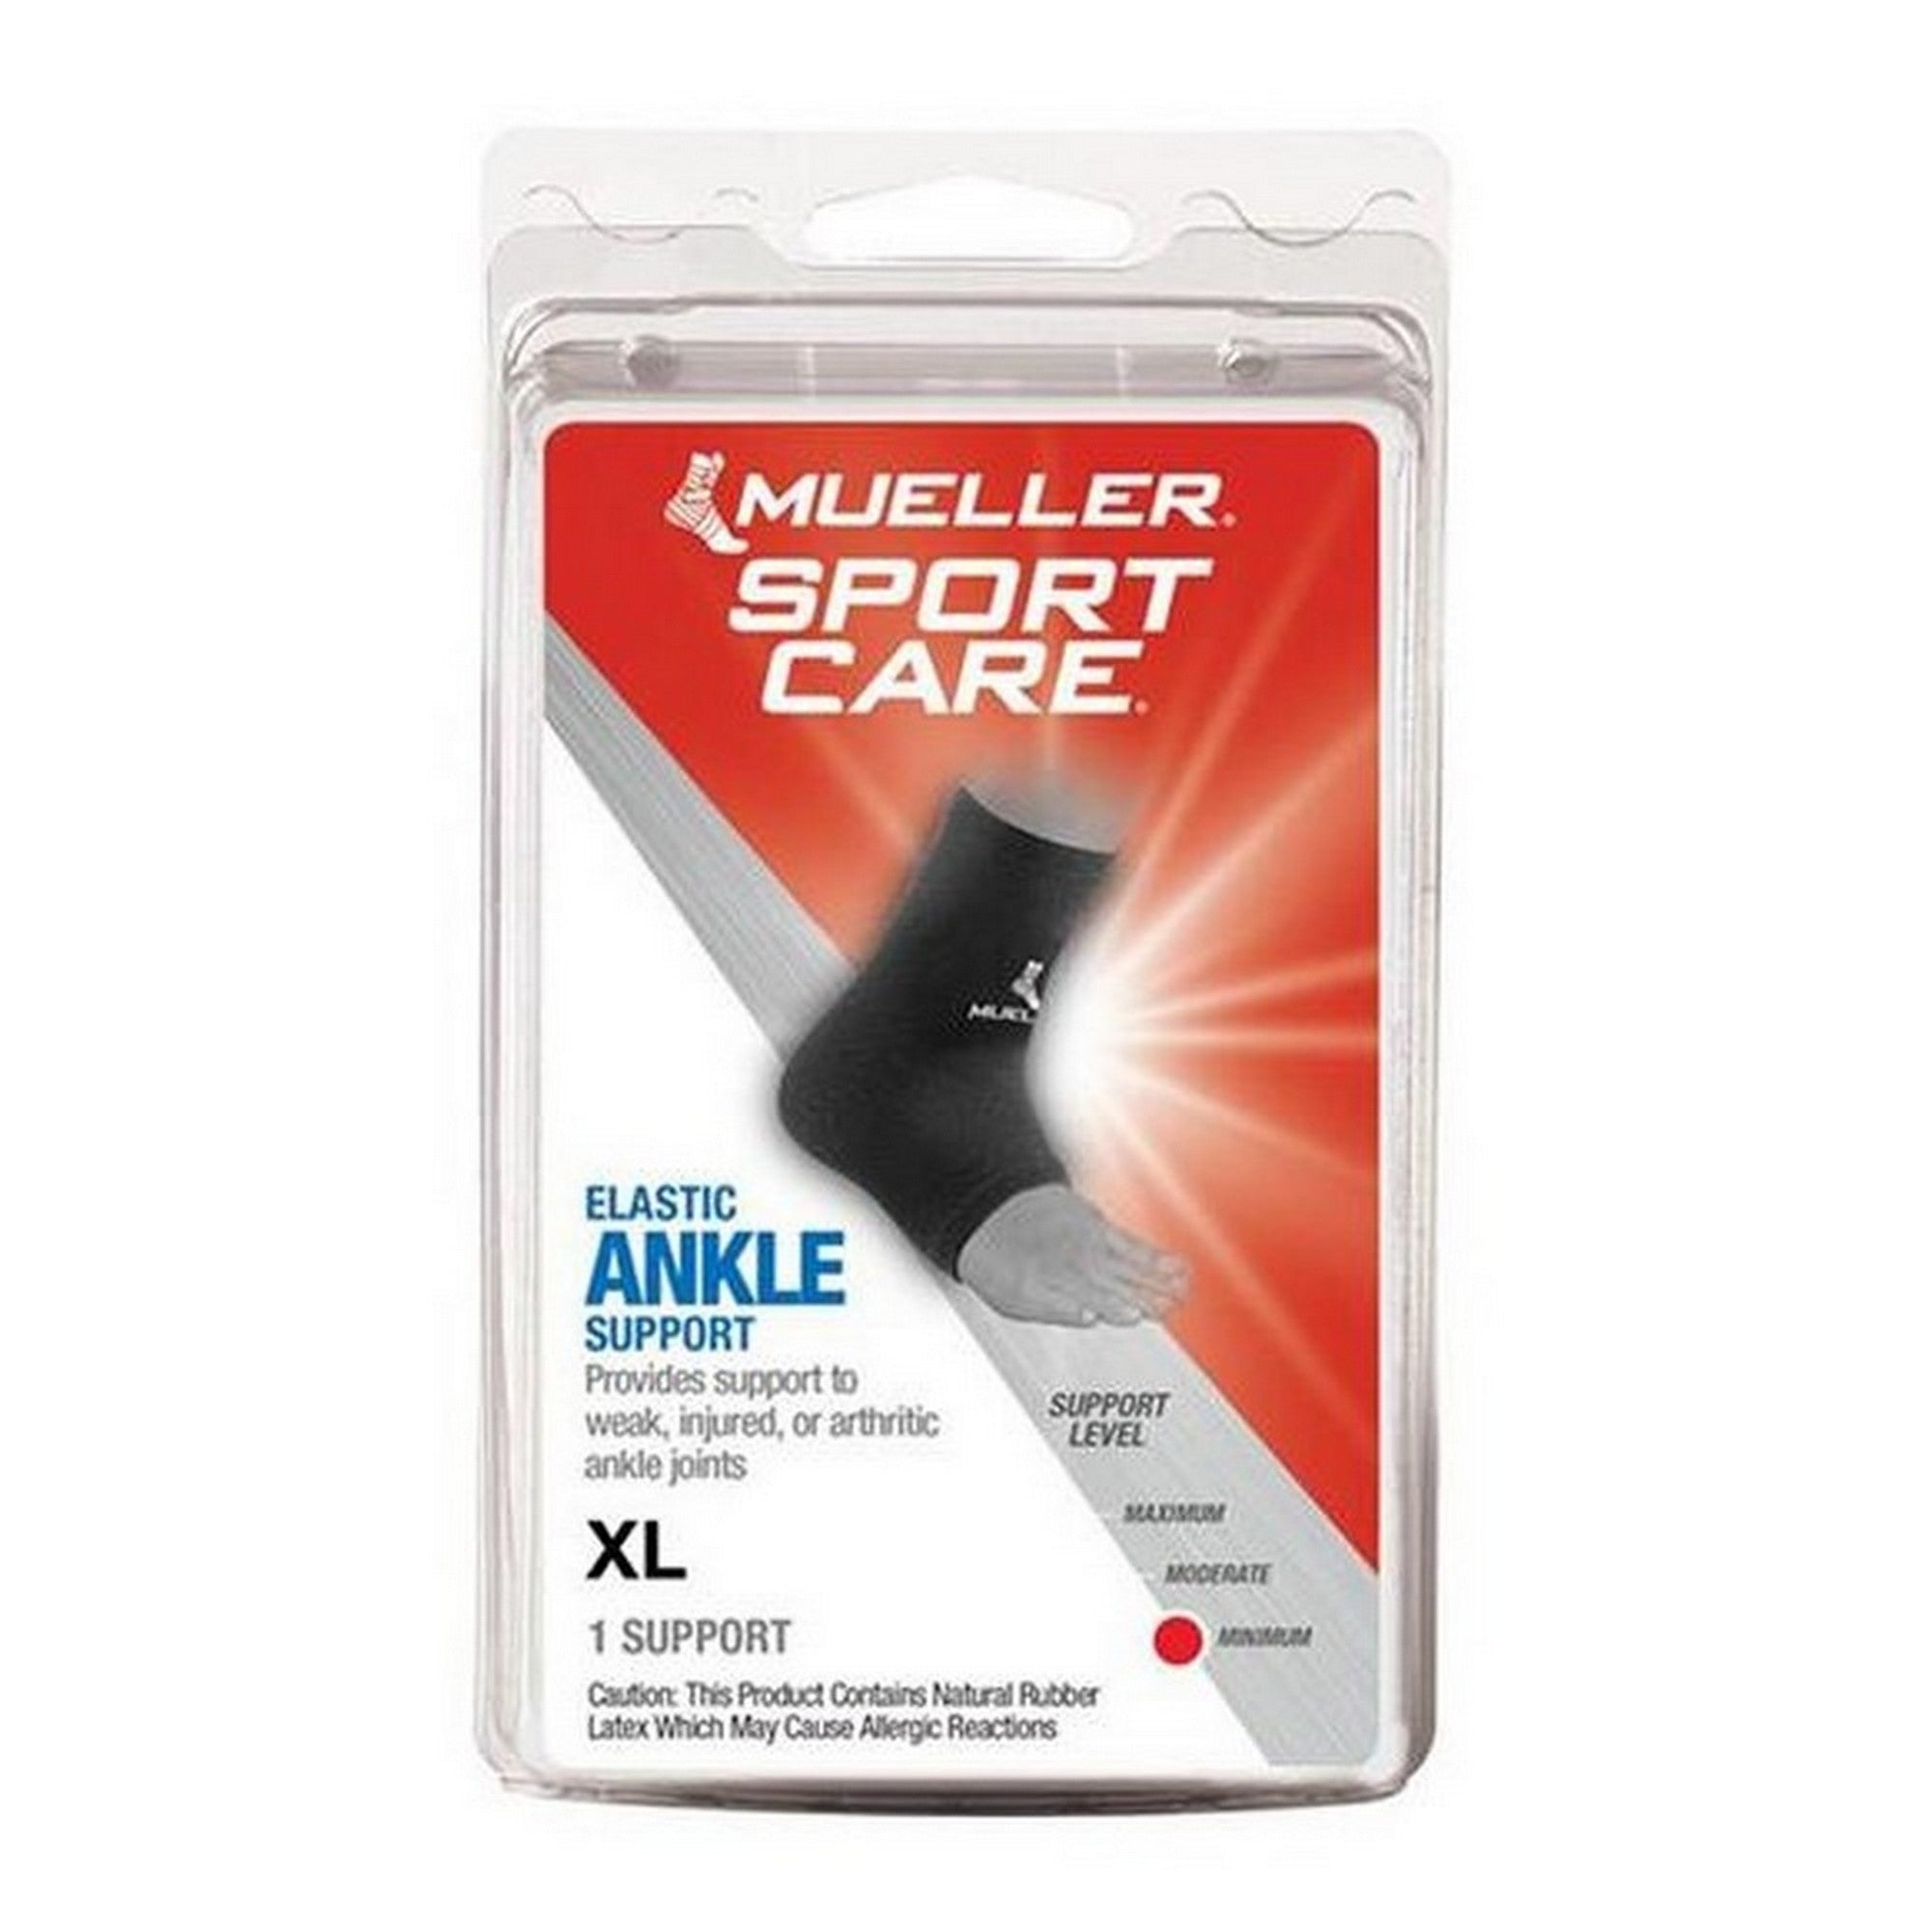 Mueller Elastic Ankle Support in Black XL